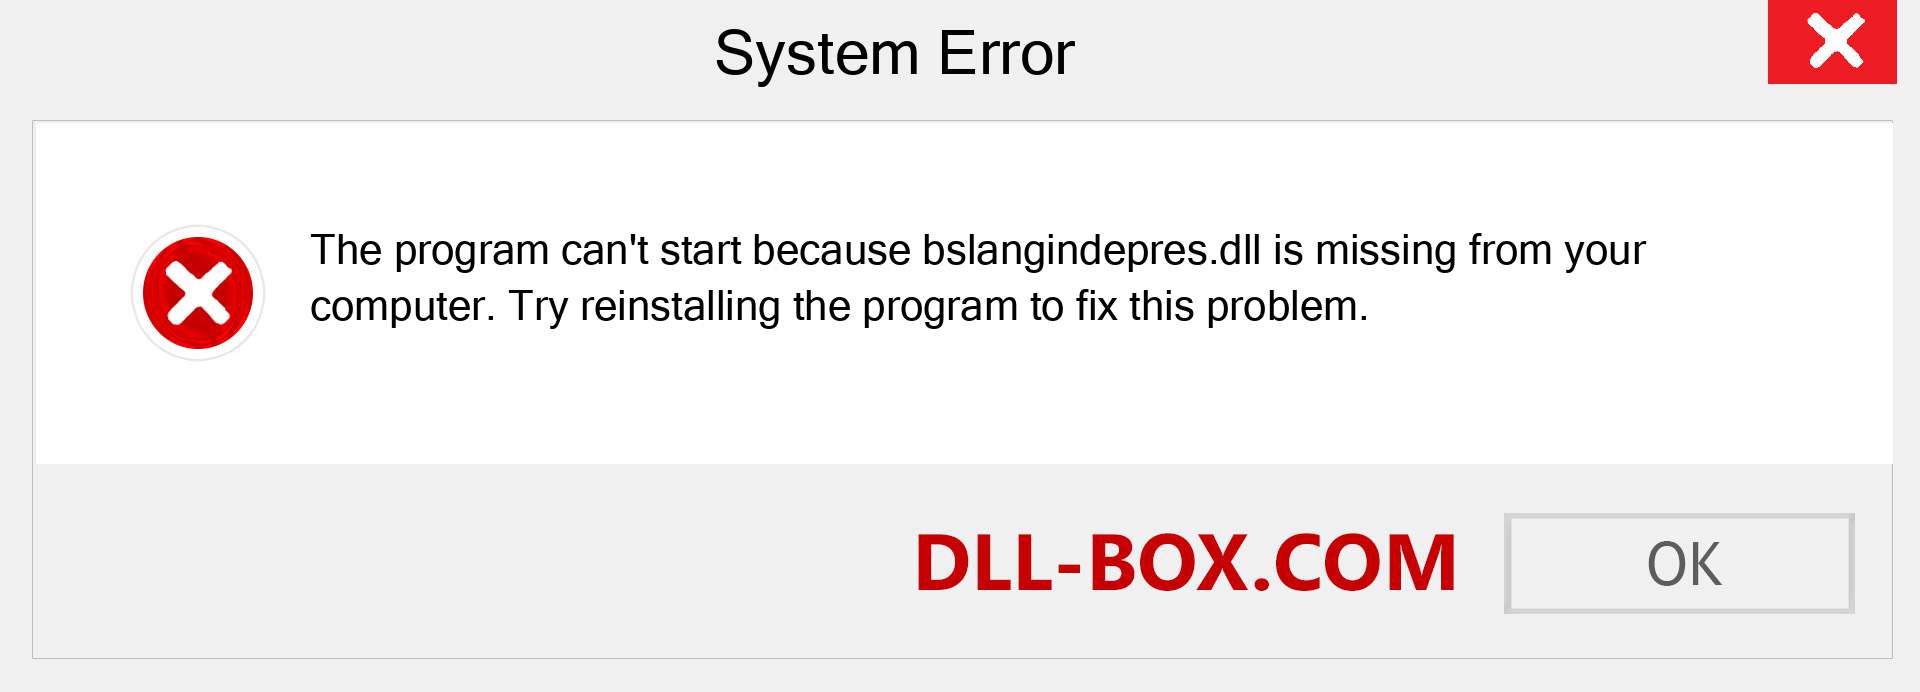  bslangindepres.dll file is missing?. Download for Windows 7, 8, 10 - Fix  bslangindepres dll Missing Error on Windows, photos, images